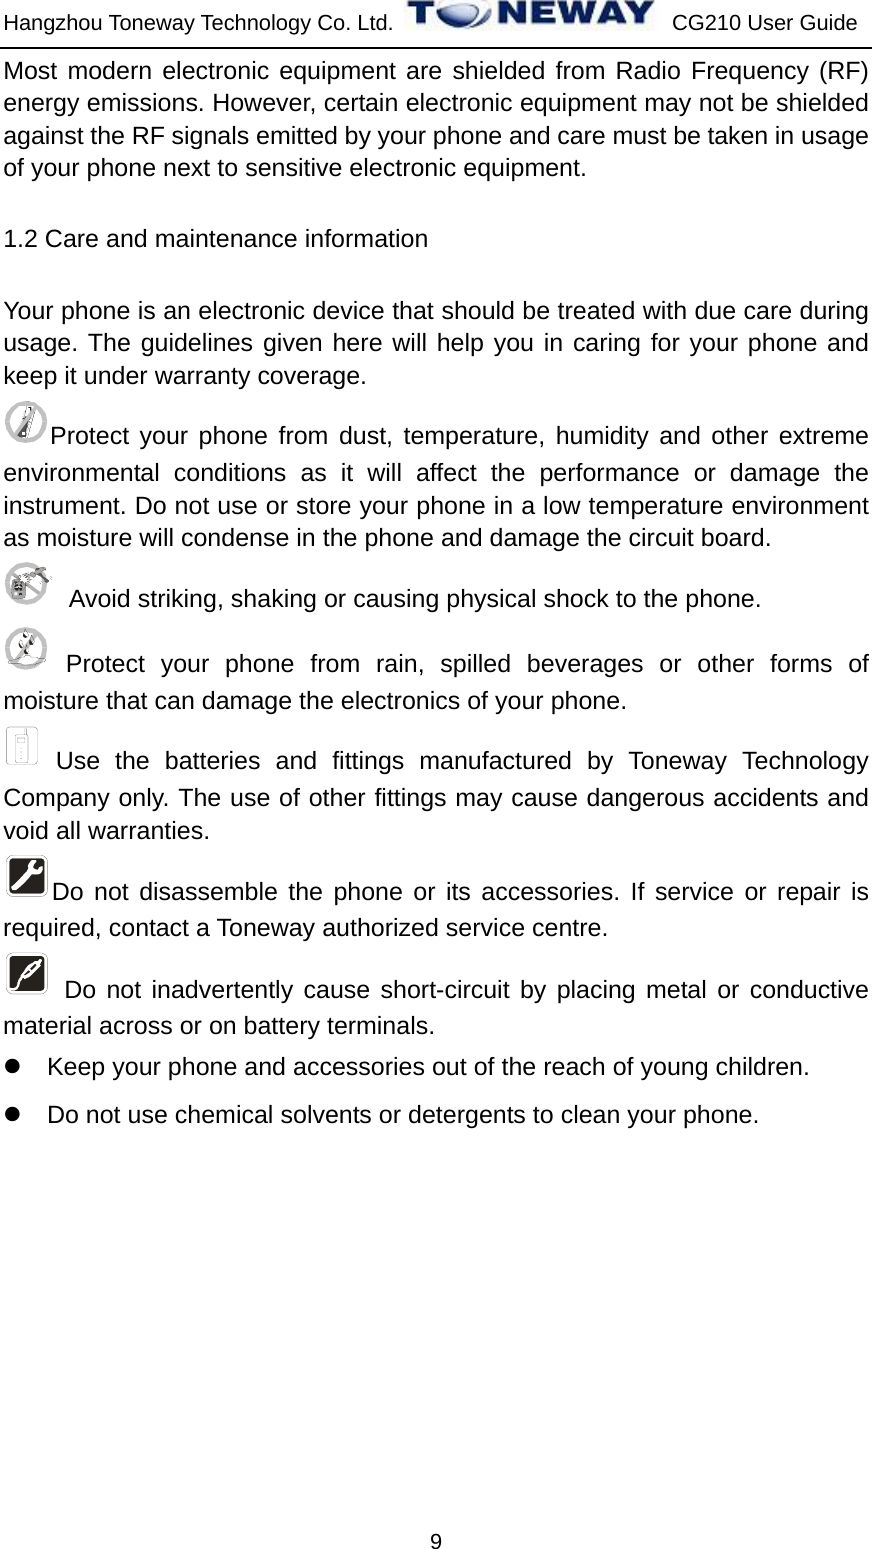 Hangzhou Toneway Technology Co. Ltd.    CG210 User Guide 9 Most modern electronic equipment are shielded from Radio Frequency (RF) energy emissions. However, certain electronic equipment may not be shielded against the RF signals emitted by your phone and care must be taken in usage of your phone next to sensitive electronic equipment. 1.2 Care and maintenance information   Your phone is an electronic device that should be treated with due care during usage. The guidelines given here will help you in caring for your phone and keep it under warranty coverage. Protect your phone from dust, temperature, humidity and other extreme environmental conditions as it will affect the performance or damage the instrument. Do not use or store your phone in a low temperature environment as moisture will condense in the phone and damage the circuit board.   Avoid striking, shaking or causing physical shock to the phone.    Protect your phone from rain, spilled beverages or other forms of moisture that can damage the electronics of your phone.  Use the batteries and fittings manufactured by Toneway Technology Company only. The use of other fittings may cause dangerous accidents and void all warranties. Do not disassemble the phone or its accessories. If service or repair is required, contact a Toneway authorized service centre.    Do not inadvertently cause short-circuit by placing metal or conductive material across or on battery terminals. z  Keep your phone and accessories out of the reach of young children. z  Do not use chemical solvents or detergents to clean your phone.   